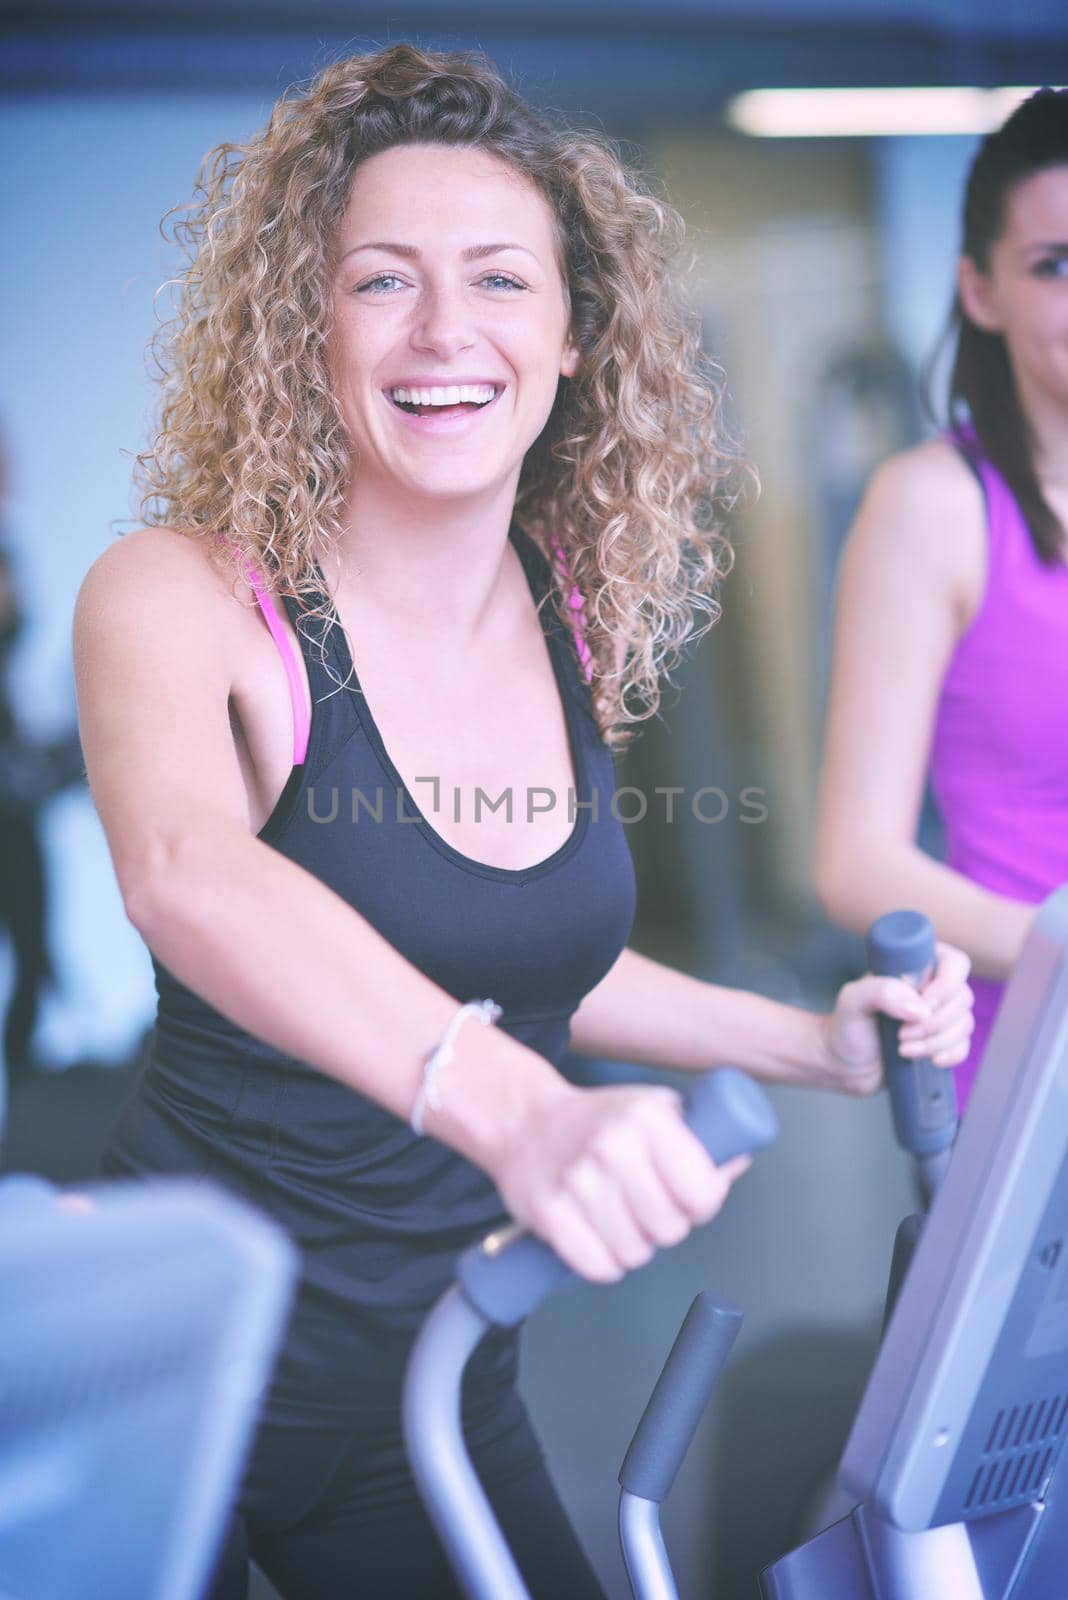 woman exercising on treadmill in gym by dotshock